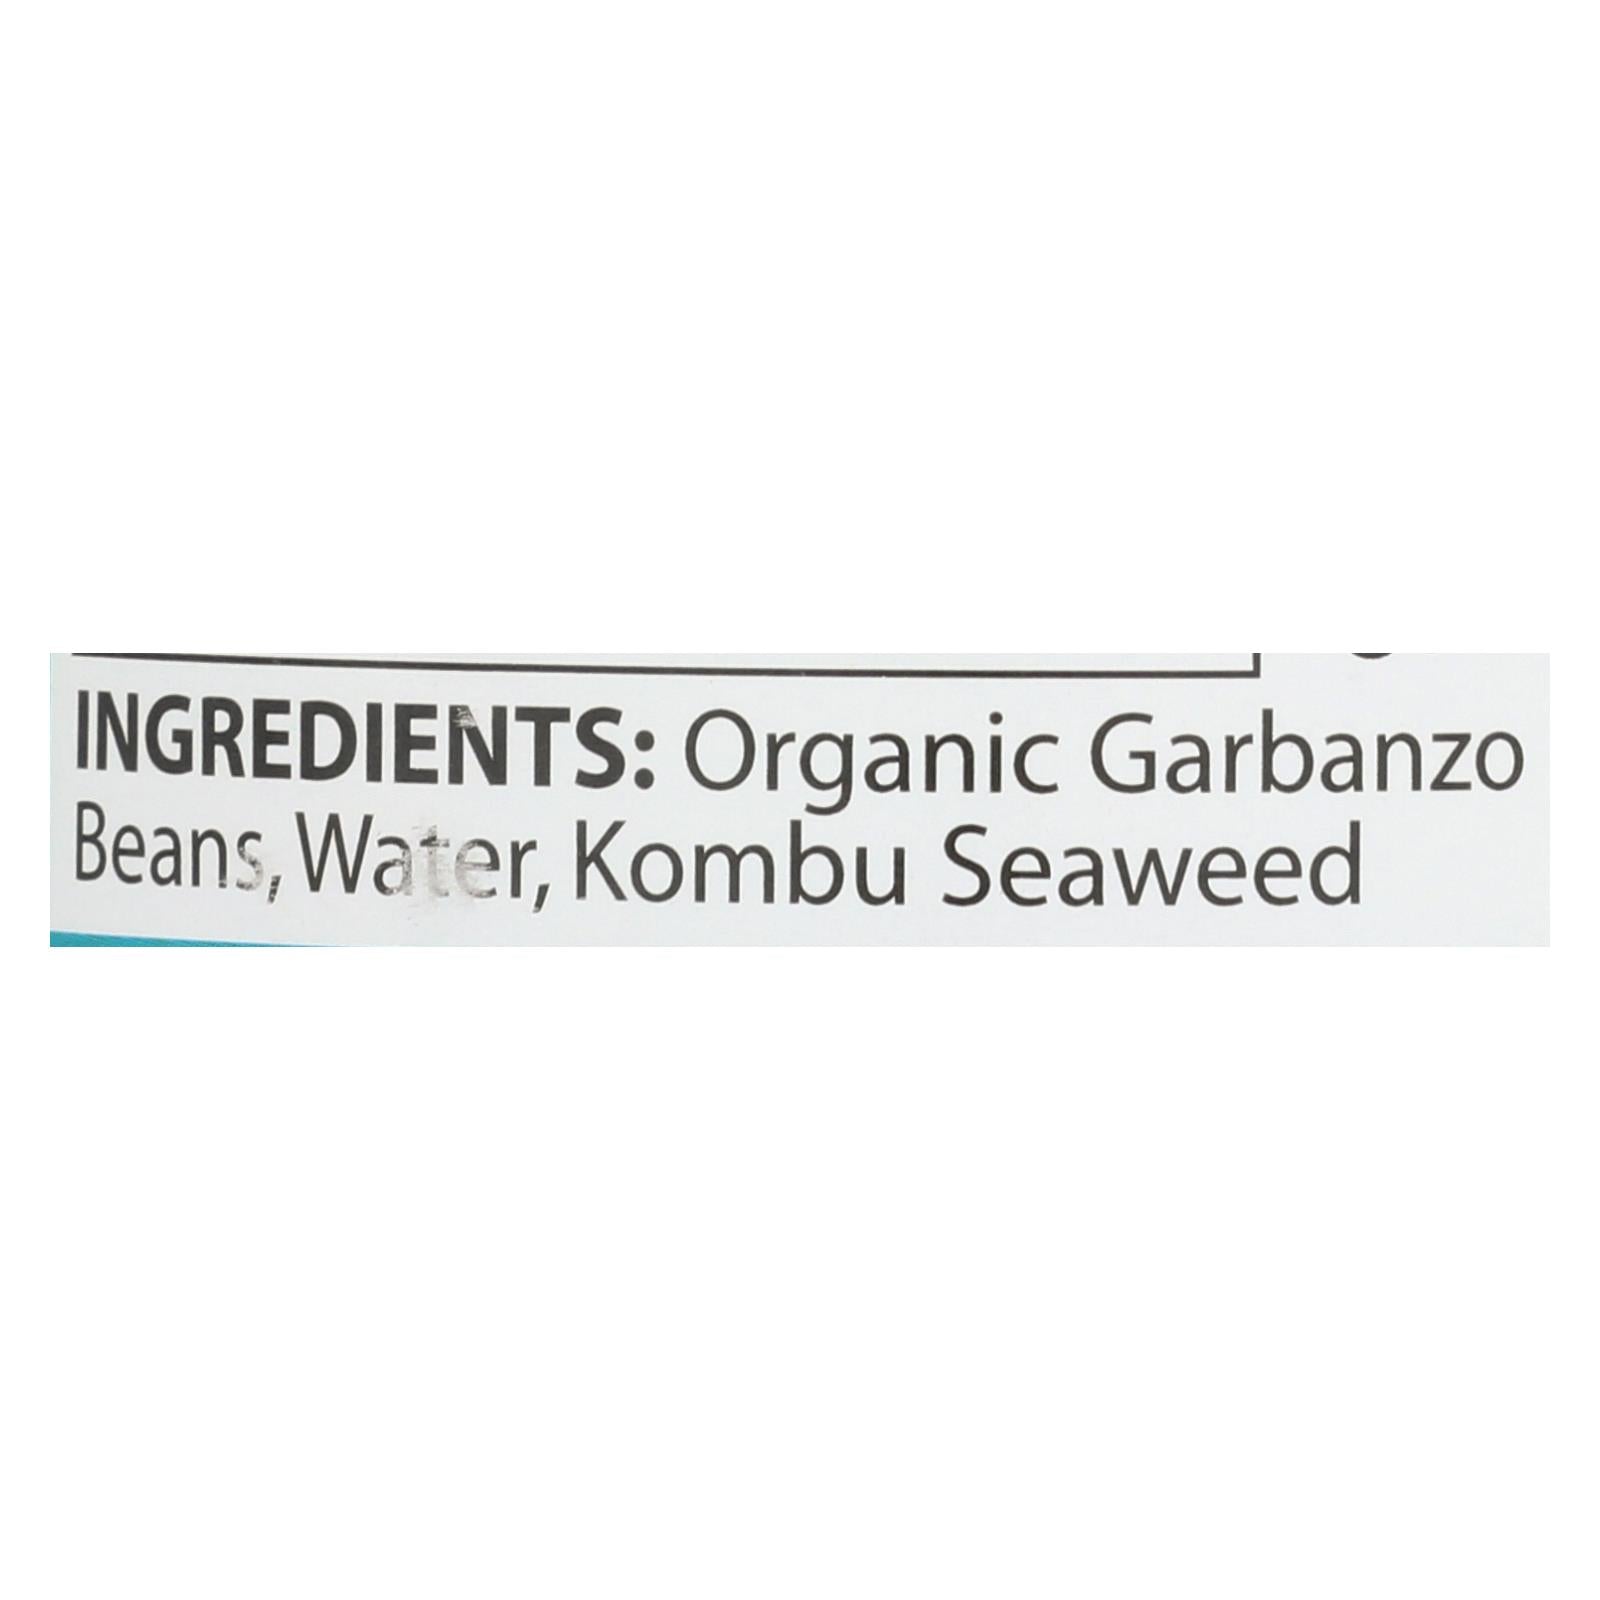 Buy Eden Foods Organic Garbanzo Beans - Case Of 12 - 15 Oz.  at OnlyNaturals.us